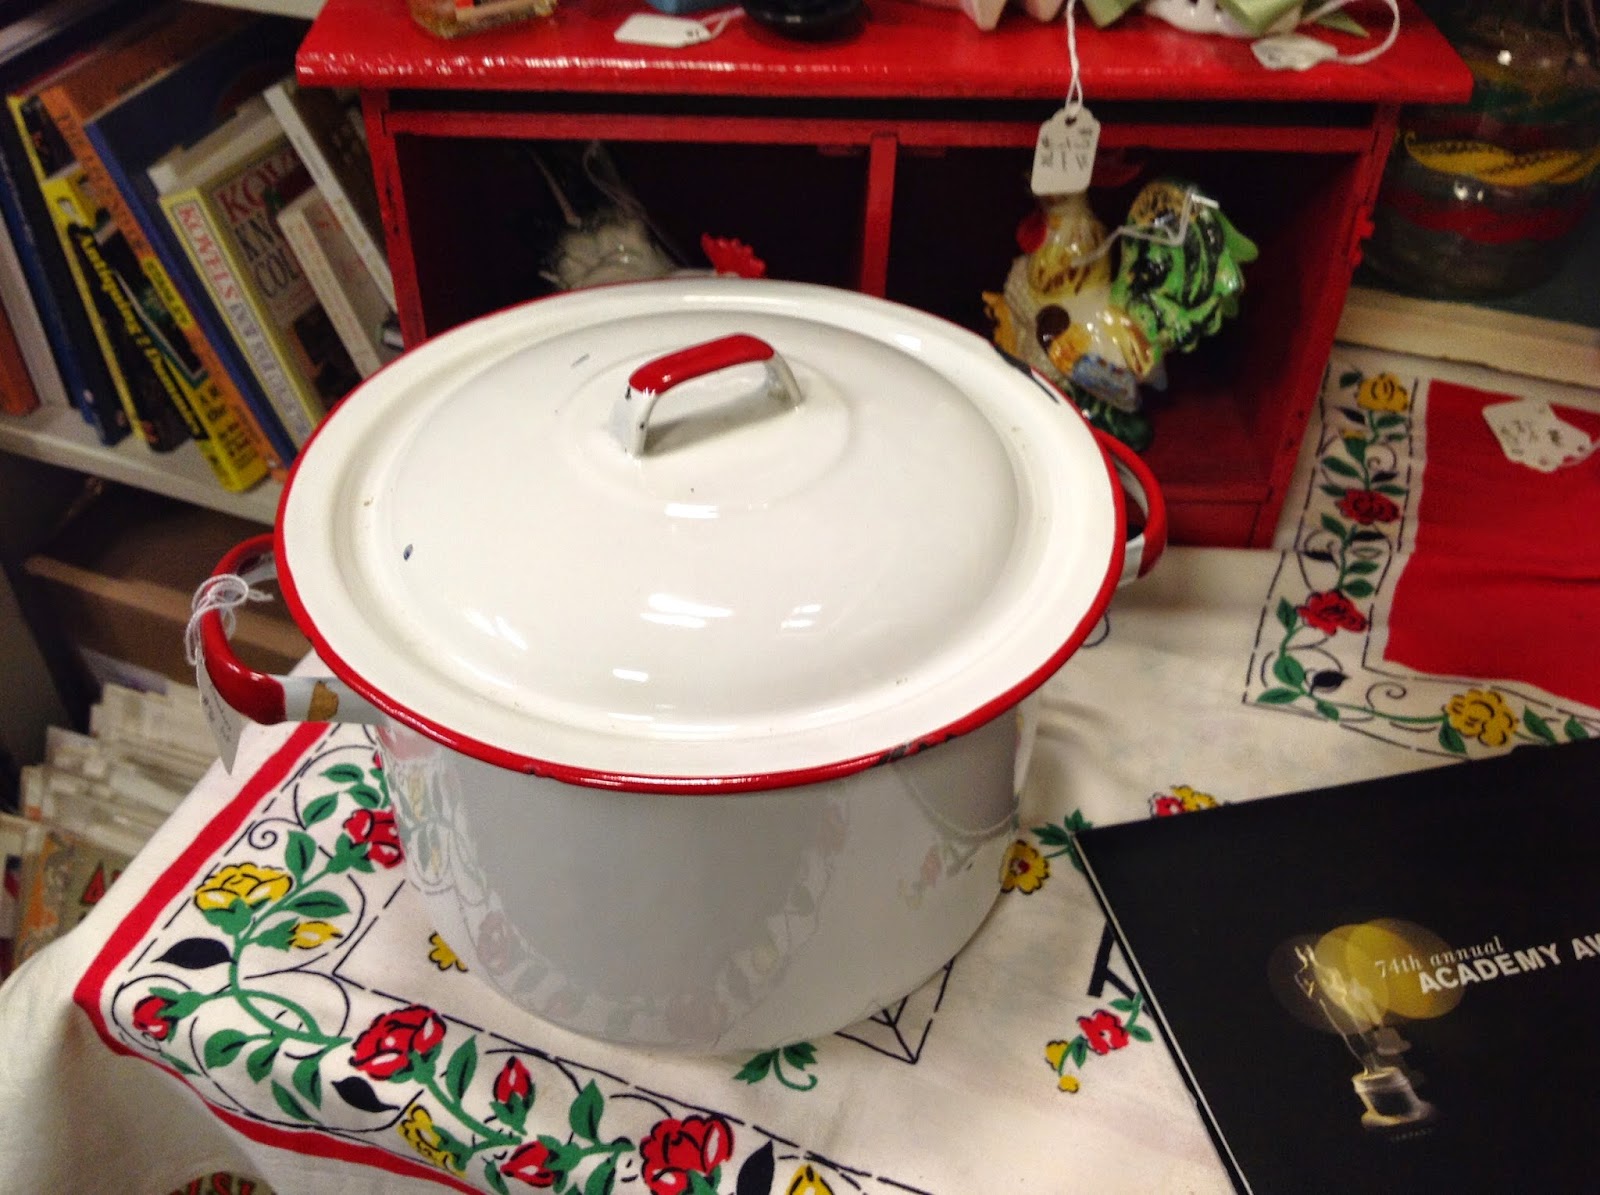 C. Dianne Zweig - Kitsch 'n Stuff: Could My Vintage Red and White Enamel  Soup Pot Really Be A Chamber Pot?